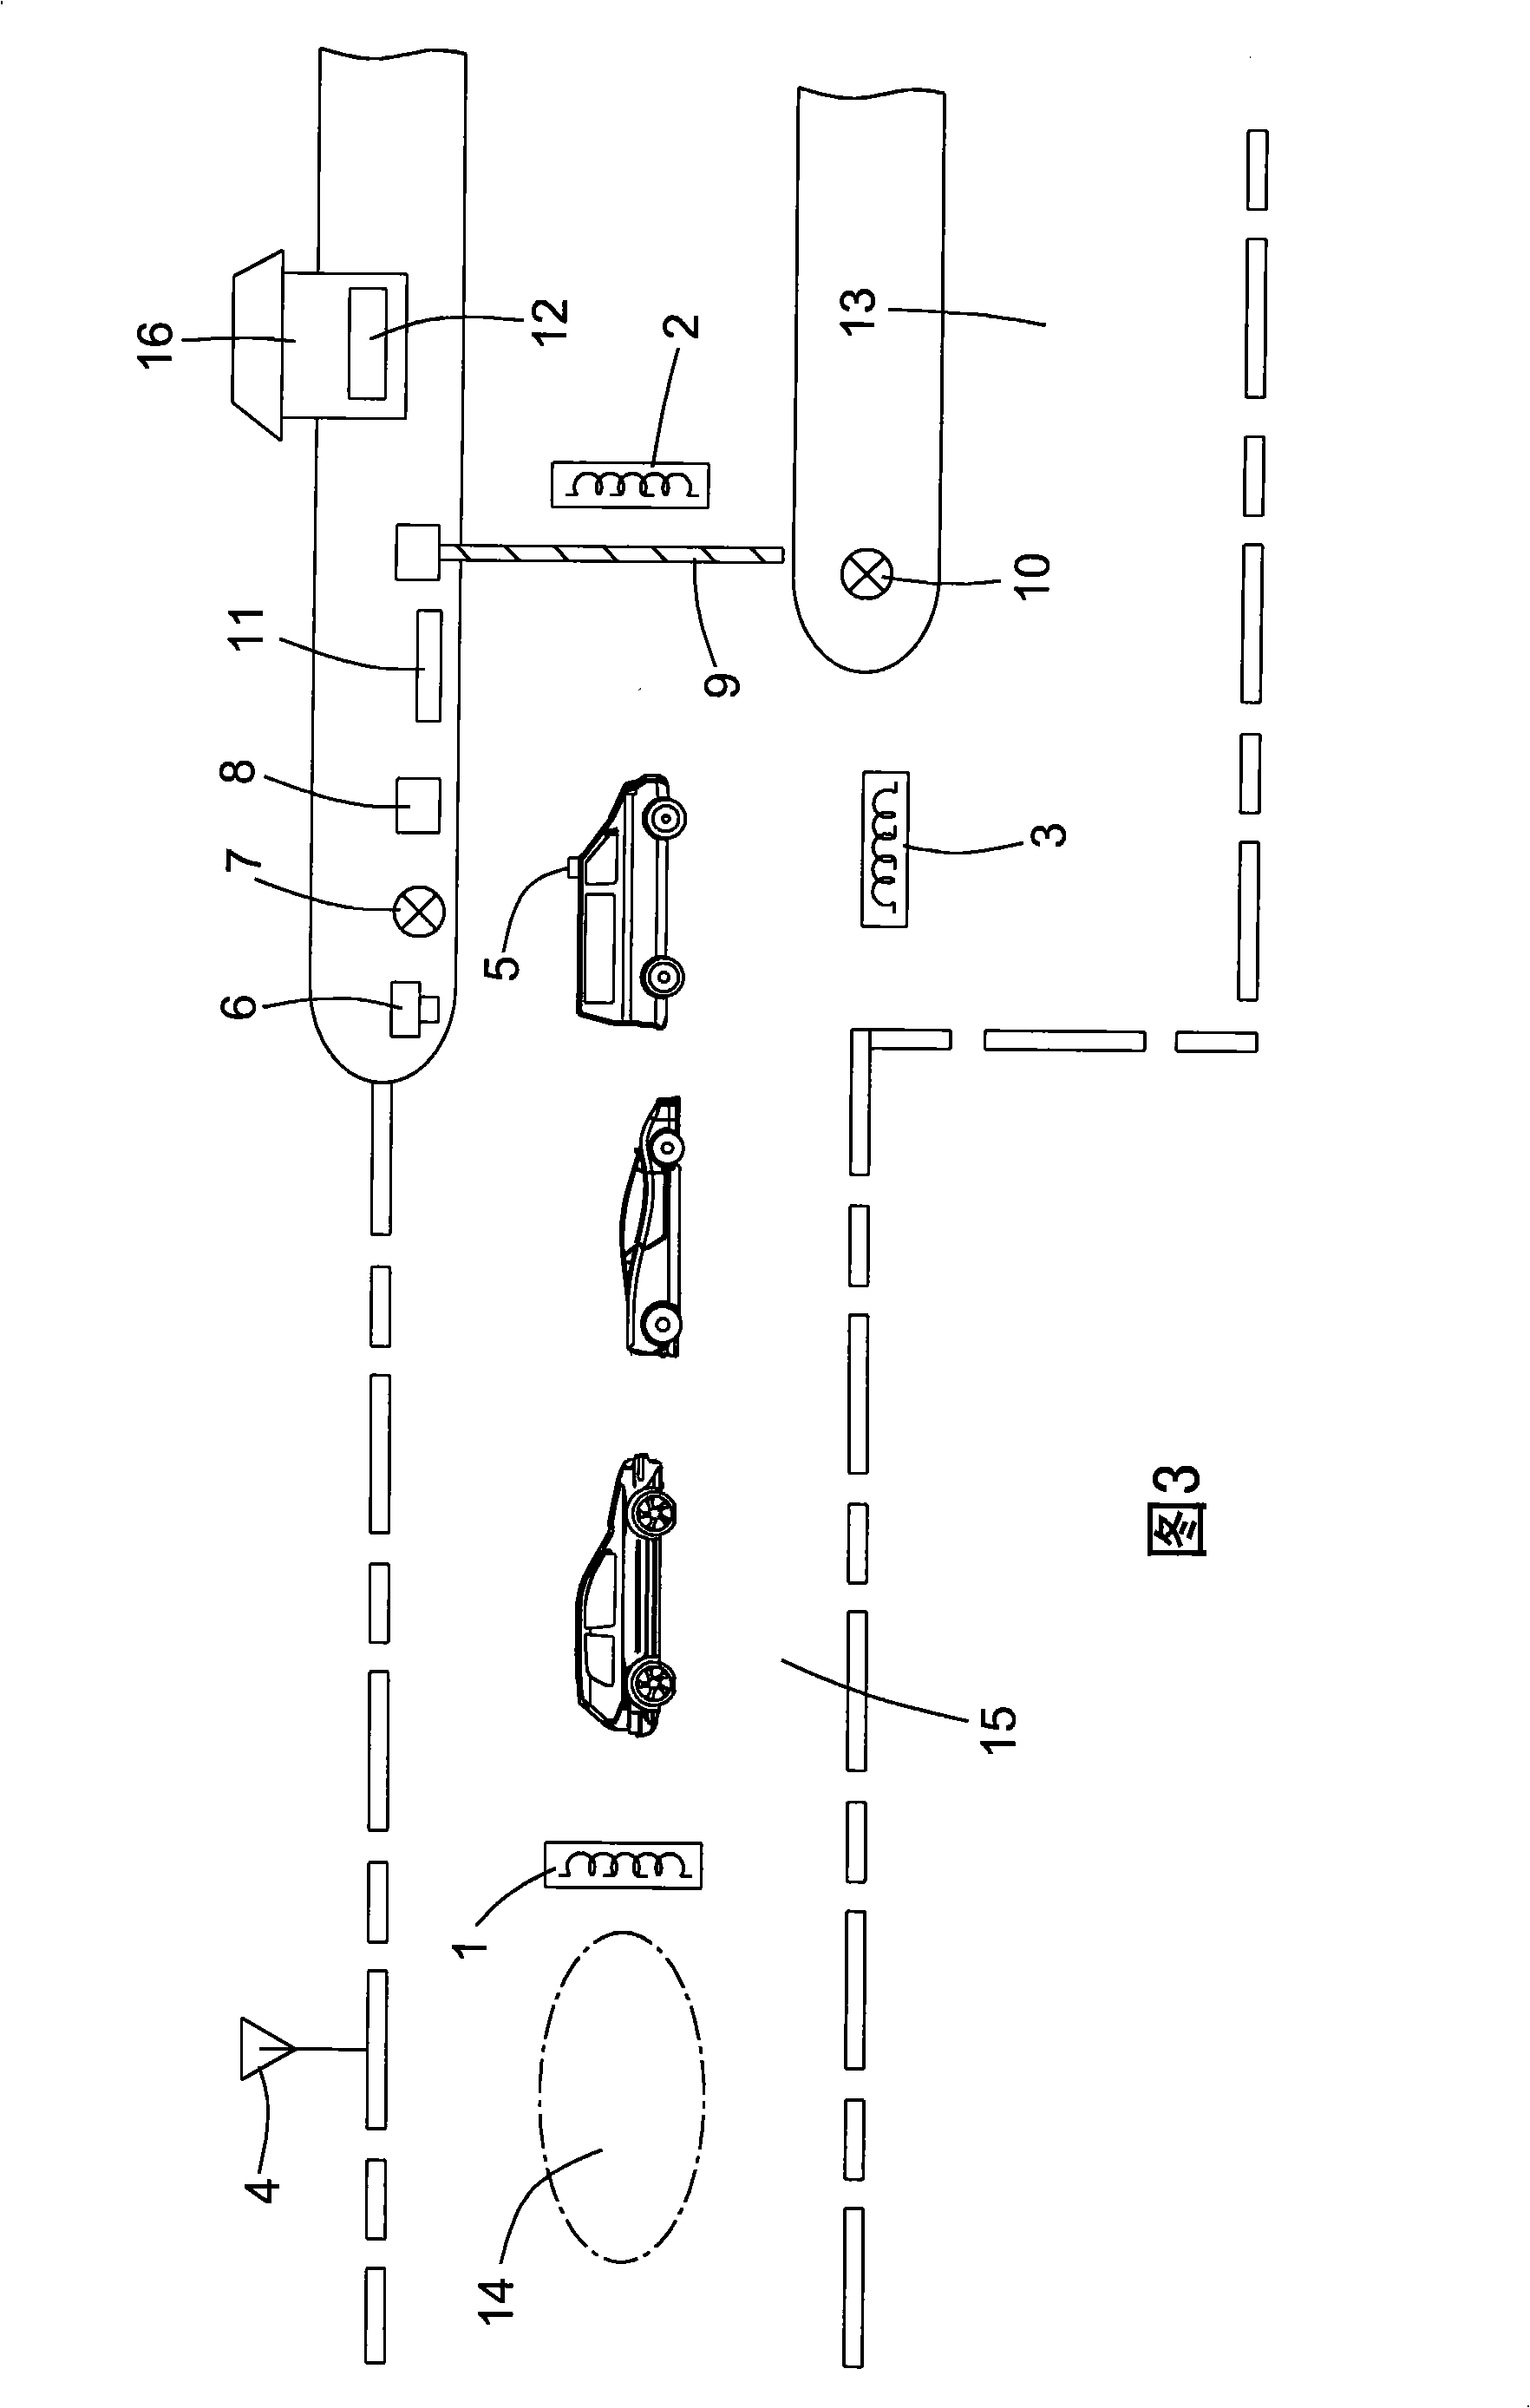 Control method for electronic charging system without parking